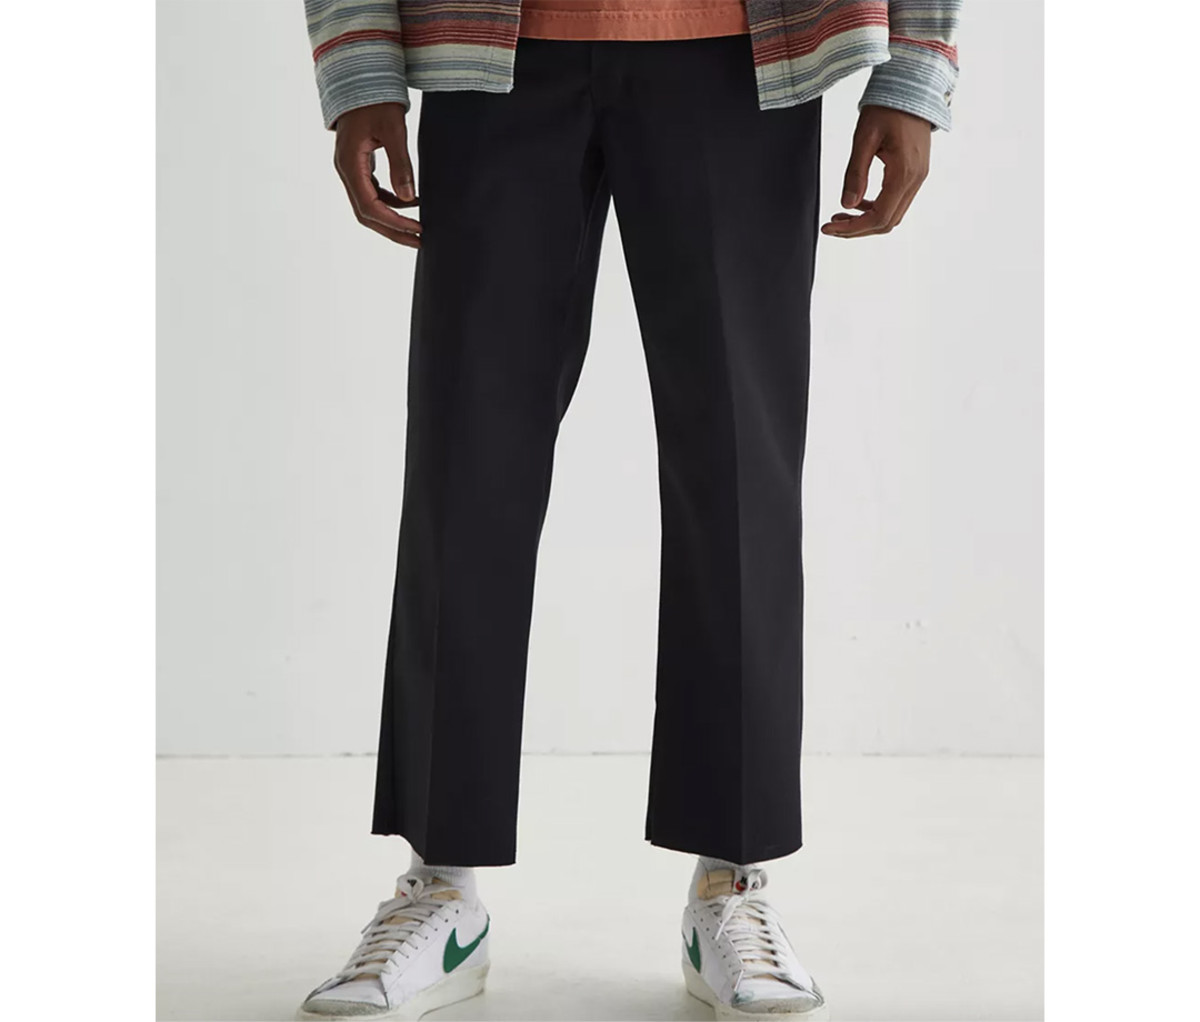 Grab Some Hot New Styles From Urban Outfitters Today! - Men's Journal